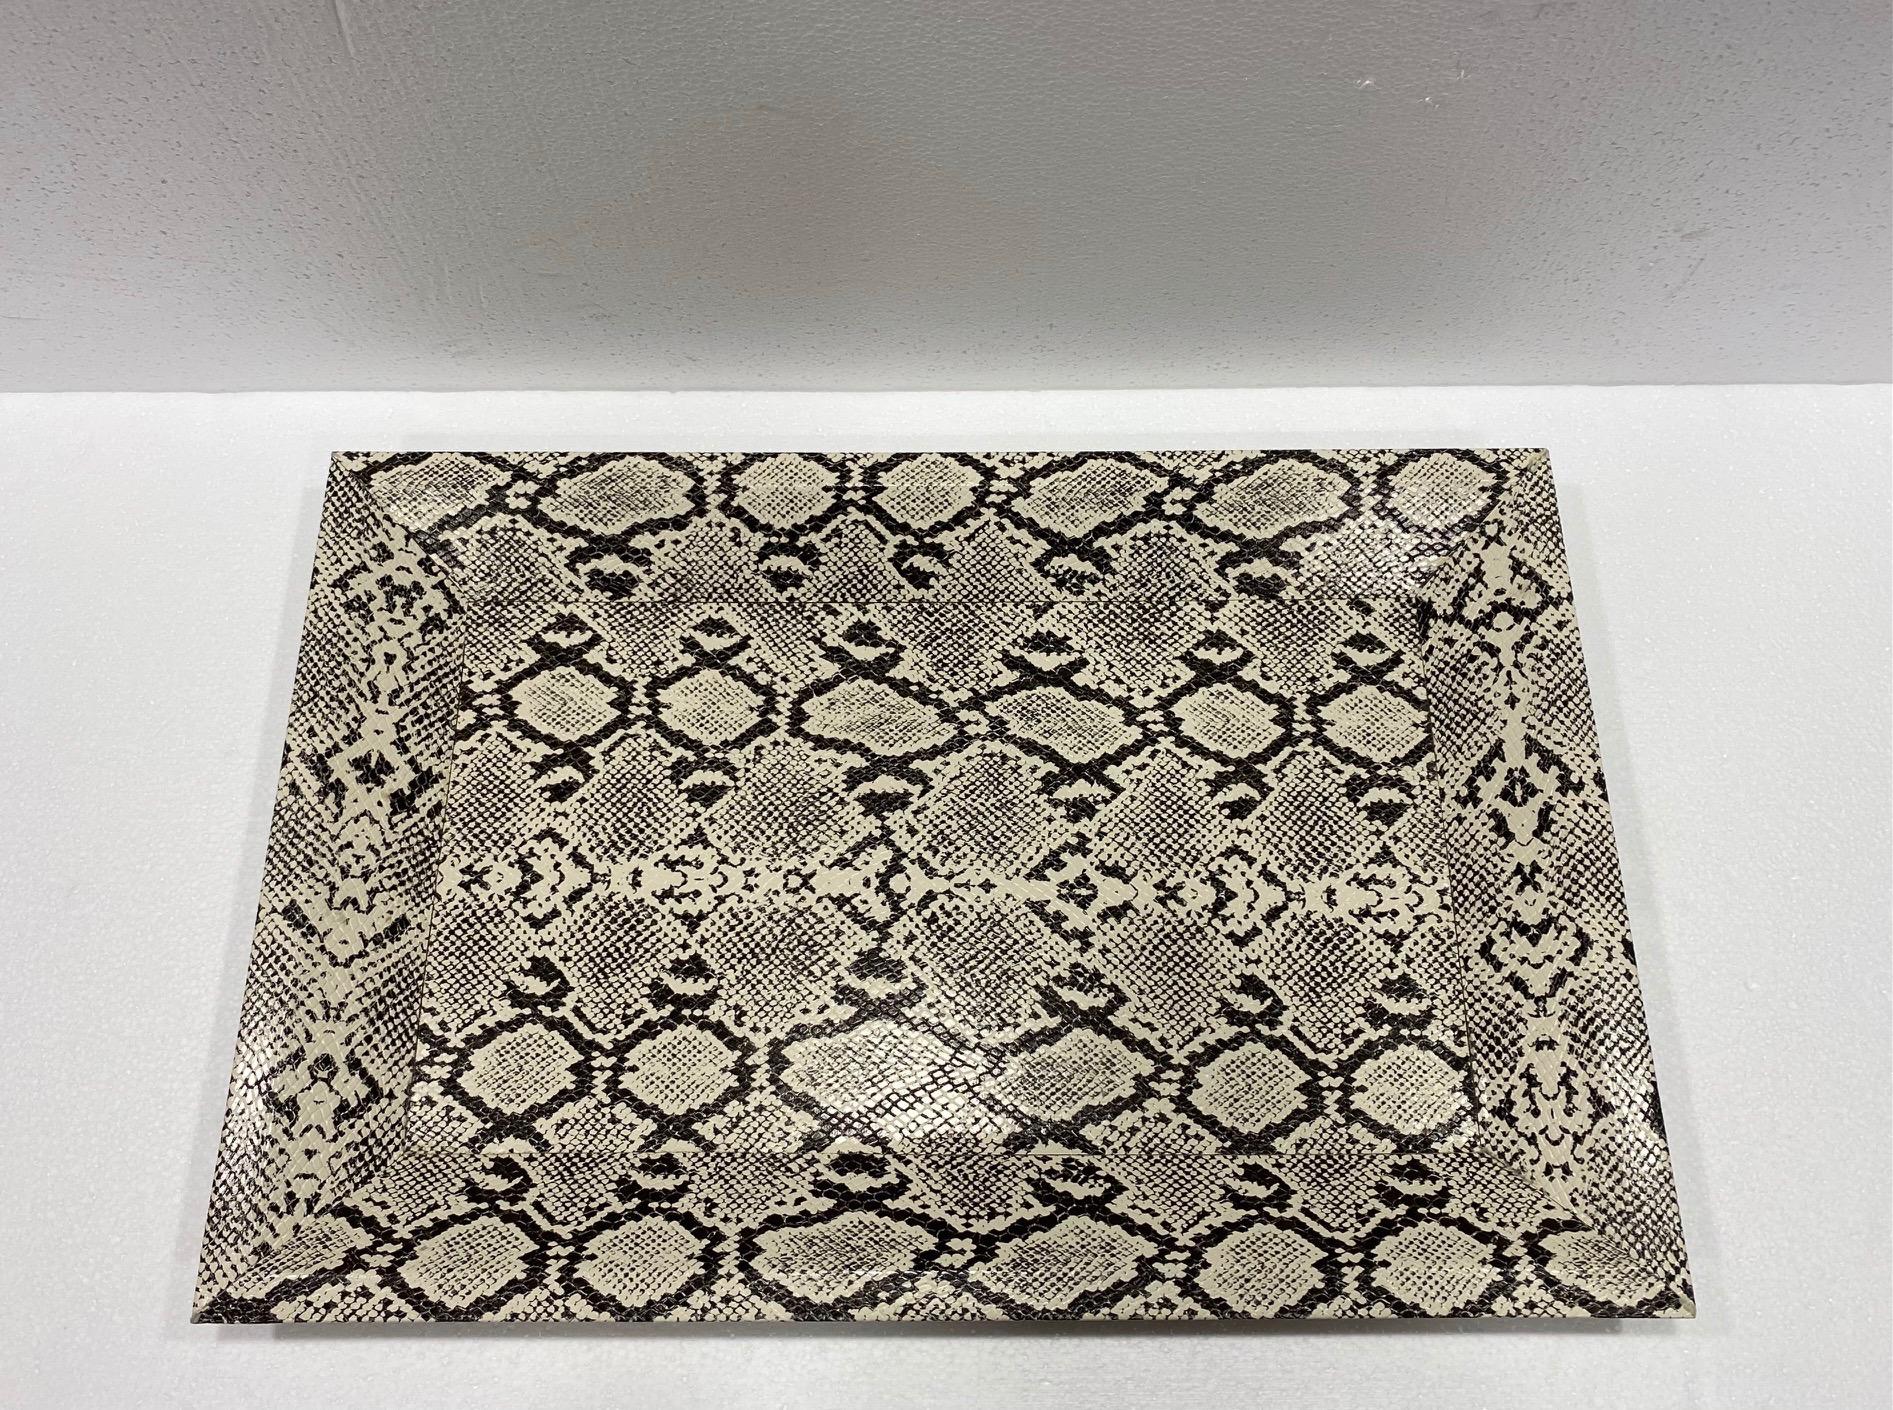 Mid-Century Modern style decorative tray with shadowbox design. Handcrafted with wood frame wrapped in faux leather and embossed python print in hues of black and cream. Makes a great coffee table accessory and a great addition to any barware set.